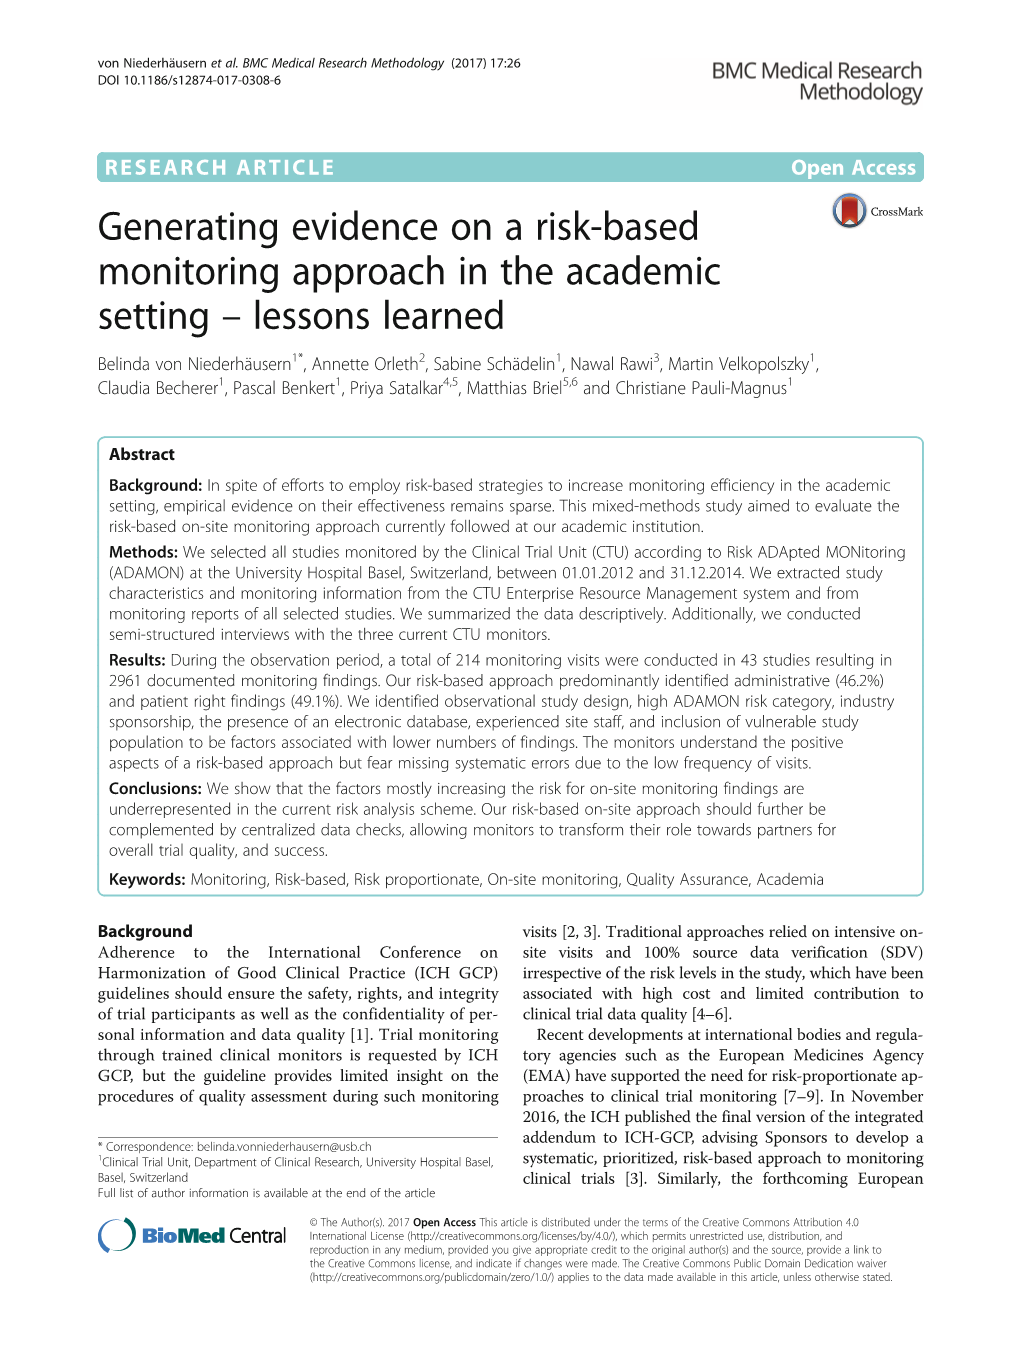 Generating Evidence on a Risk-Based Monitoring Approach in The